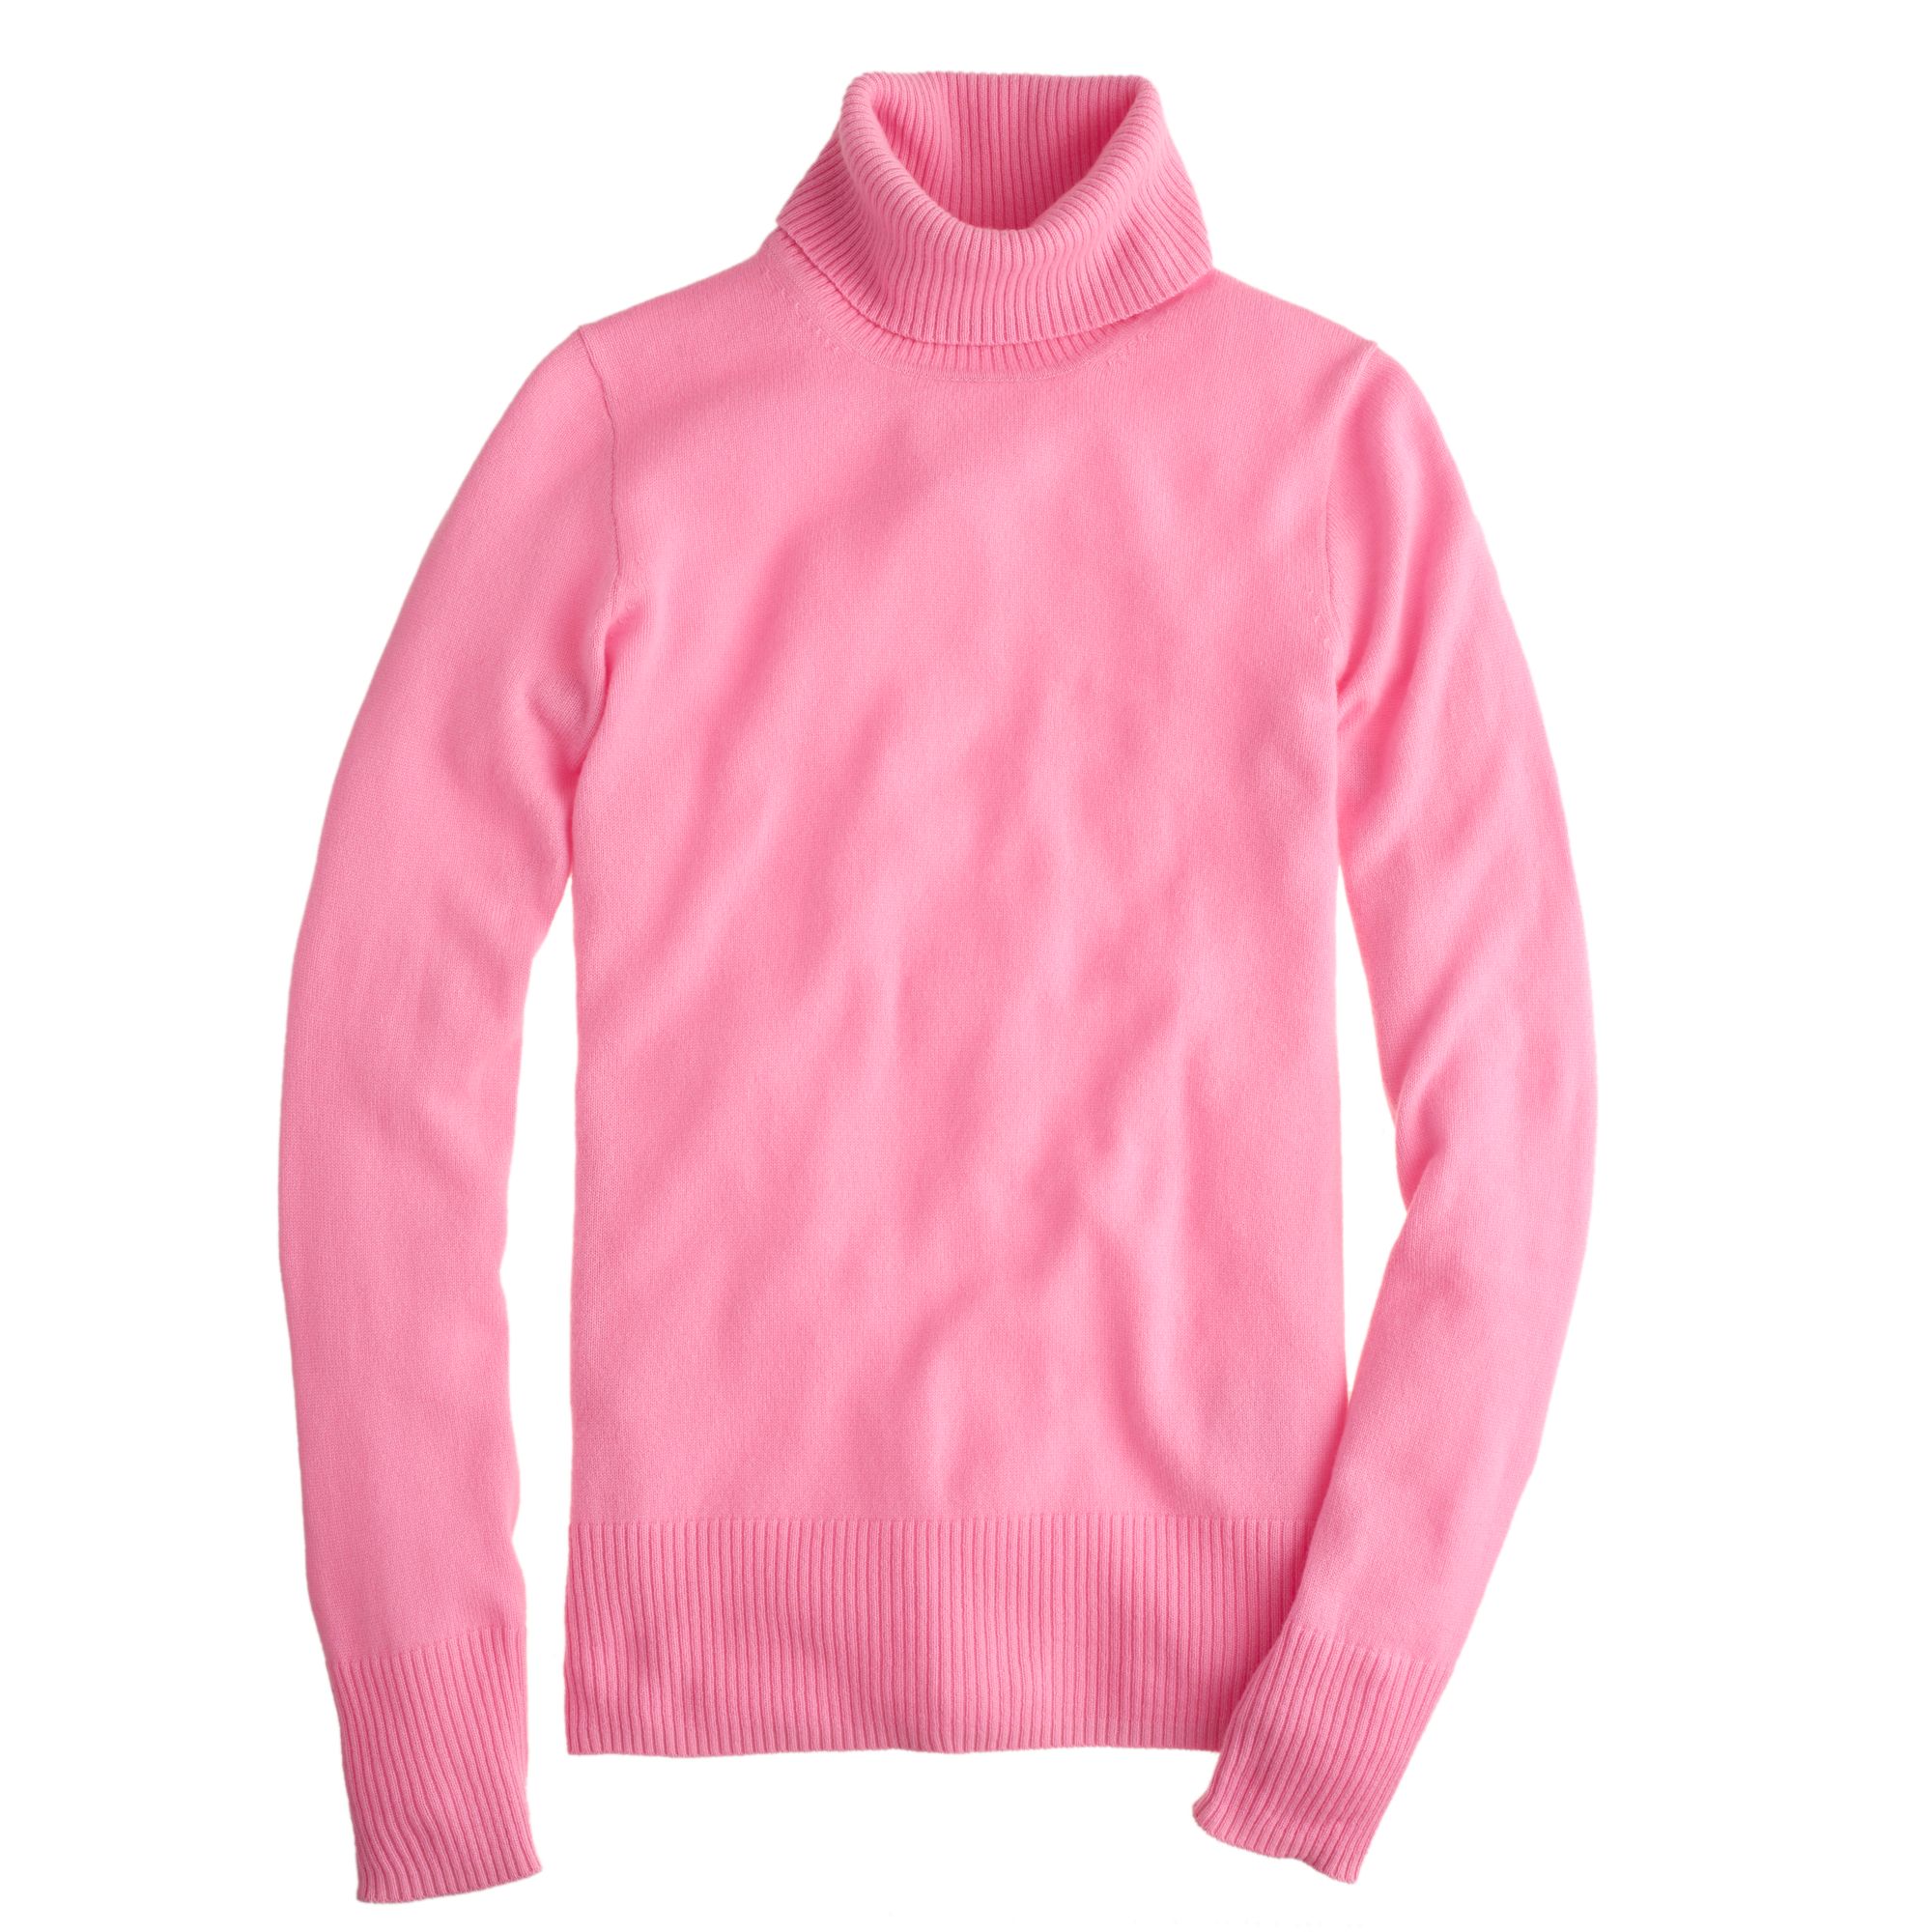 J.crew Collection Cashmere Turtleneck Sweater in Pink | Lyst